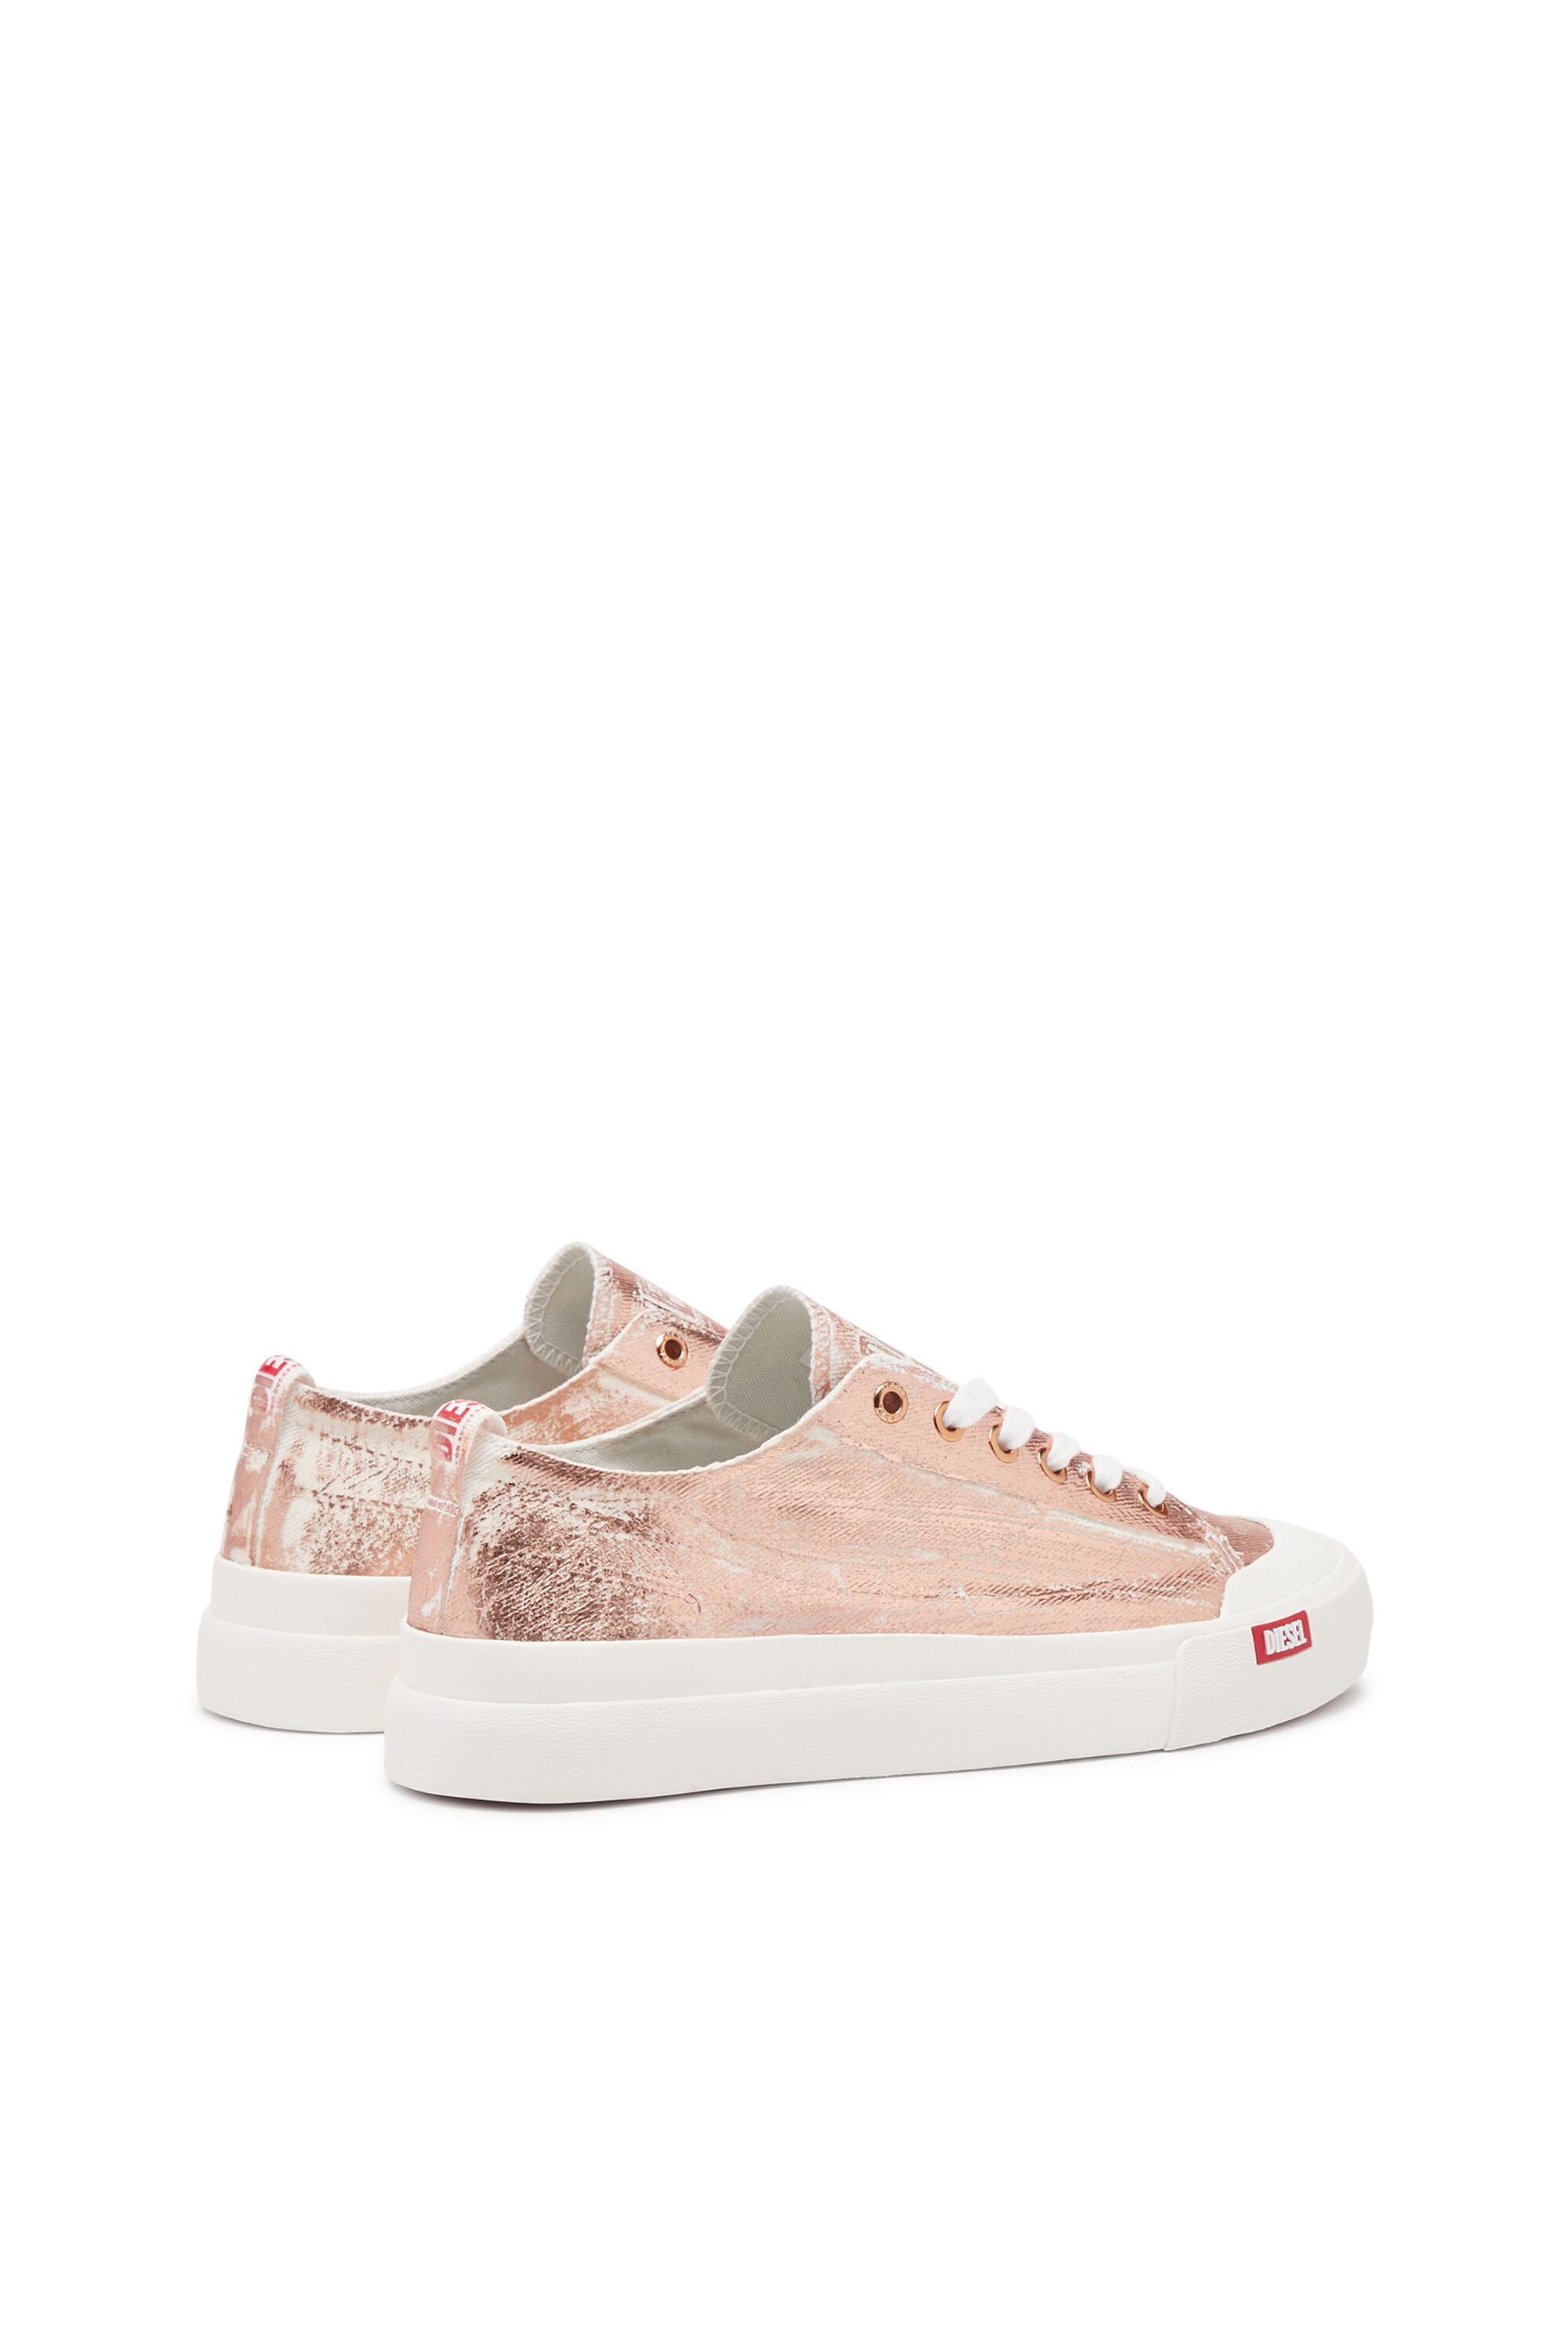 Diesel - S-ATHOS LOW W, Donna S-Athos Low-Sneaker in canvas metallizzato distressed in Rosa - Image 3